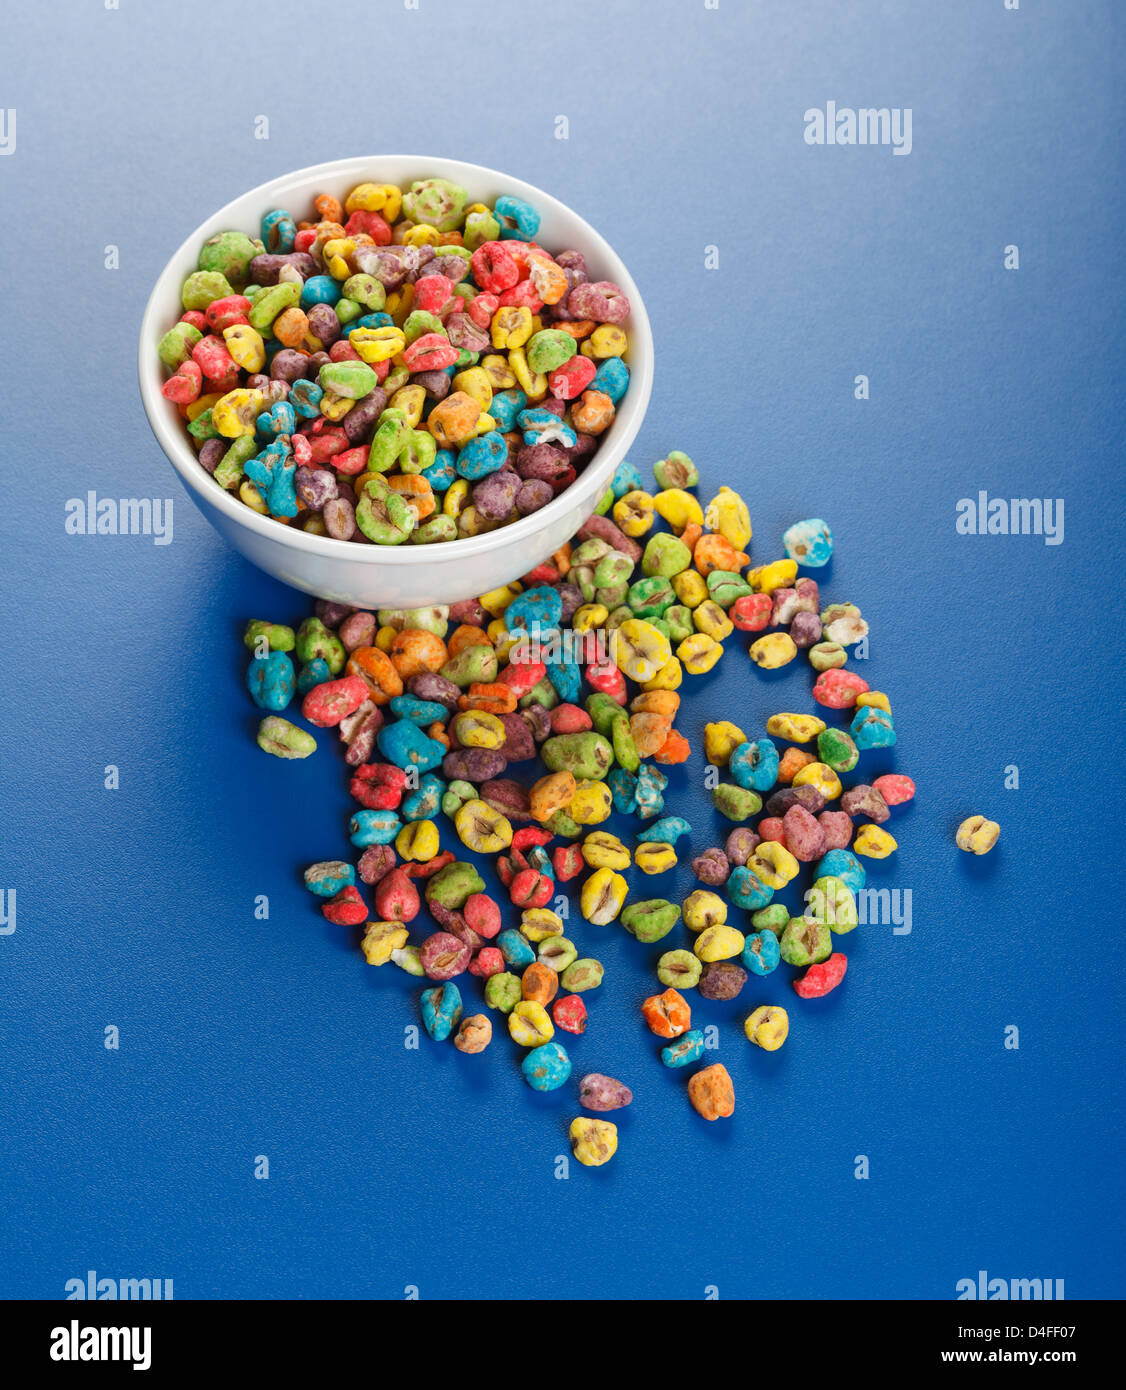 Unhealthy food: popped wheat seeds with lots of artificial colorant Stock Photo